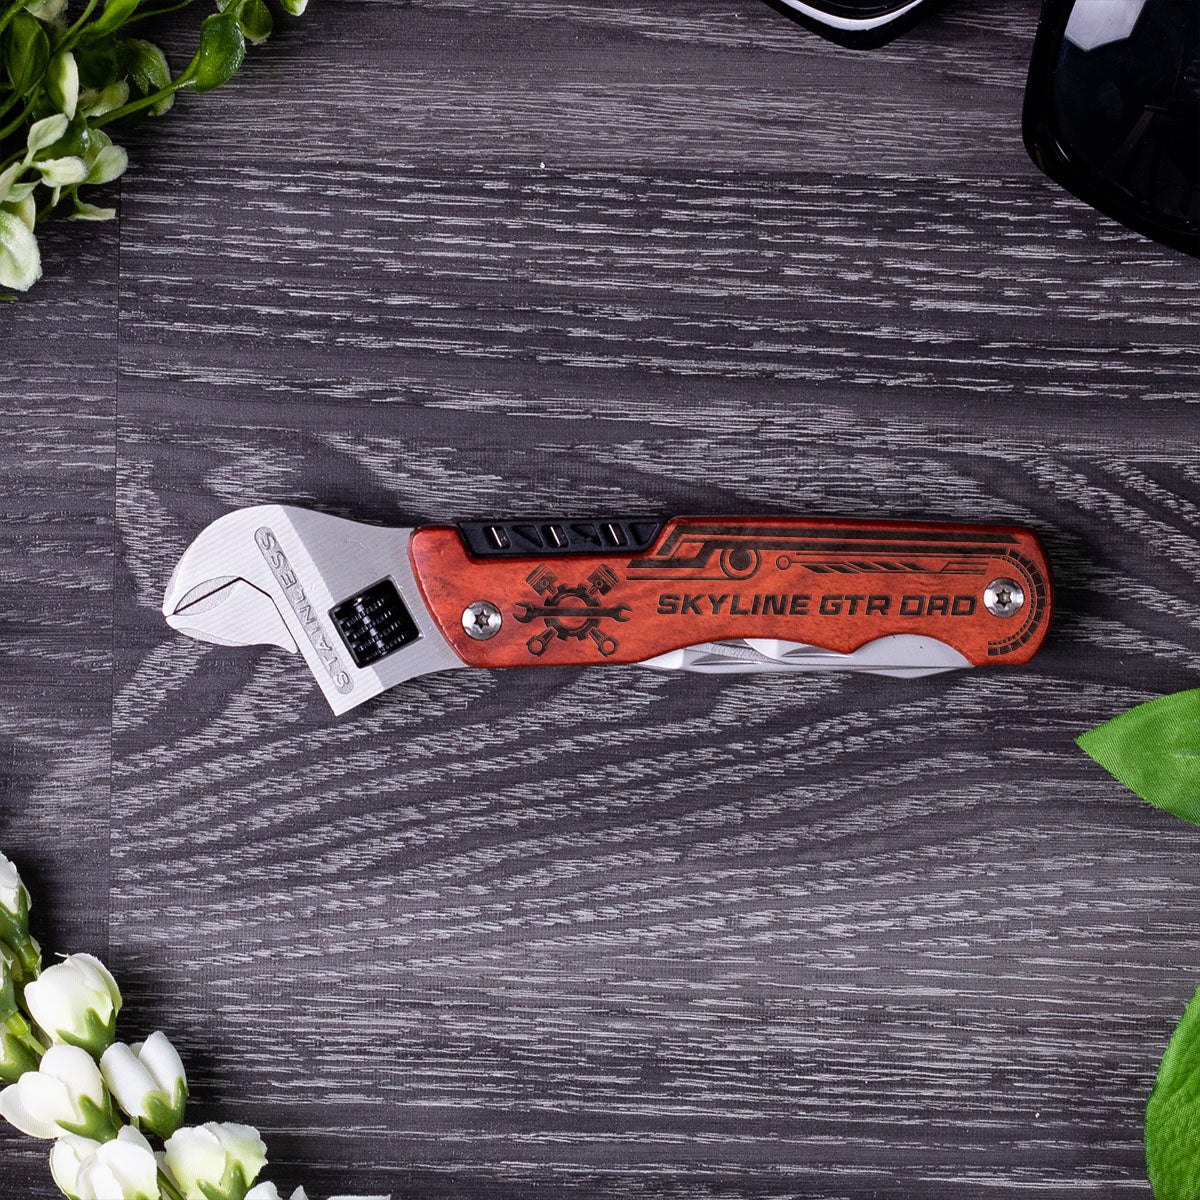 Skyline/GTR Dad Wrench Multi-Tool with Wood Handle